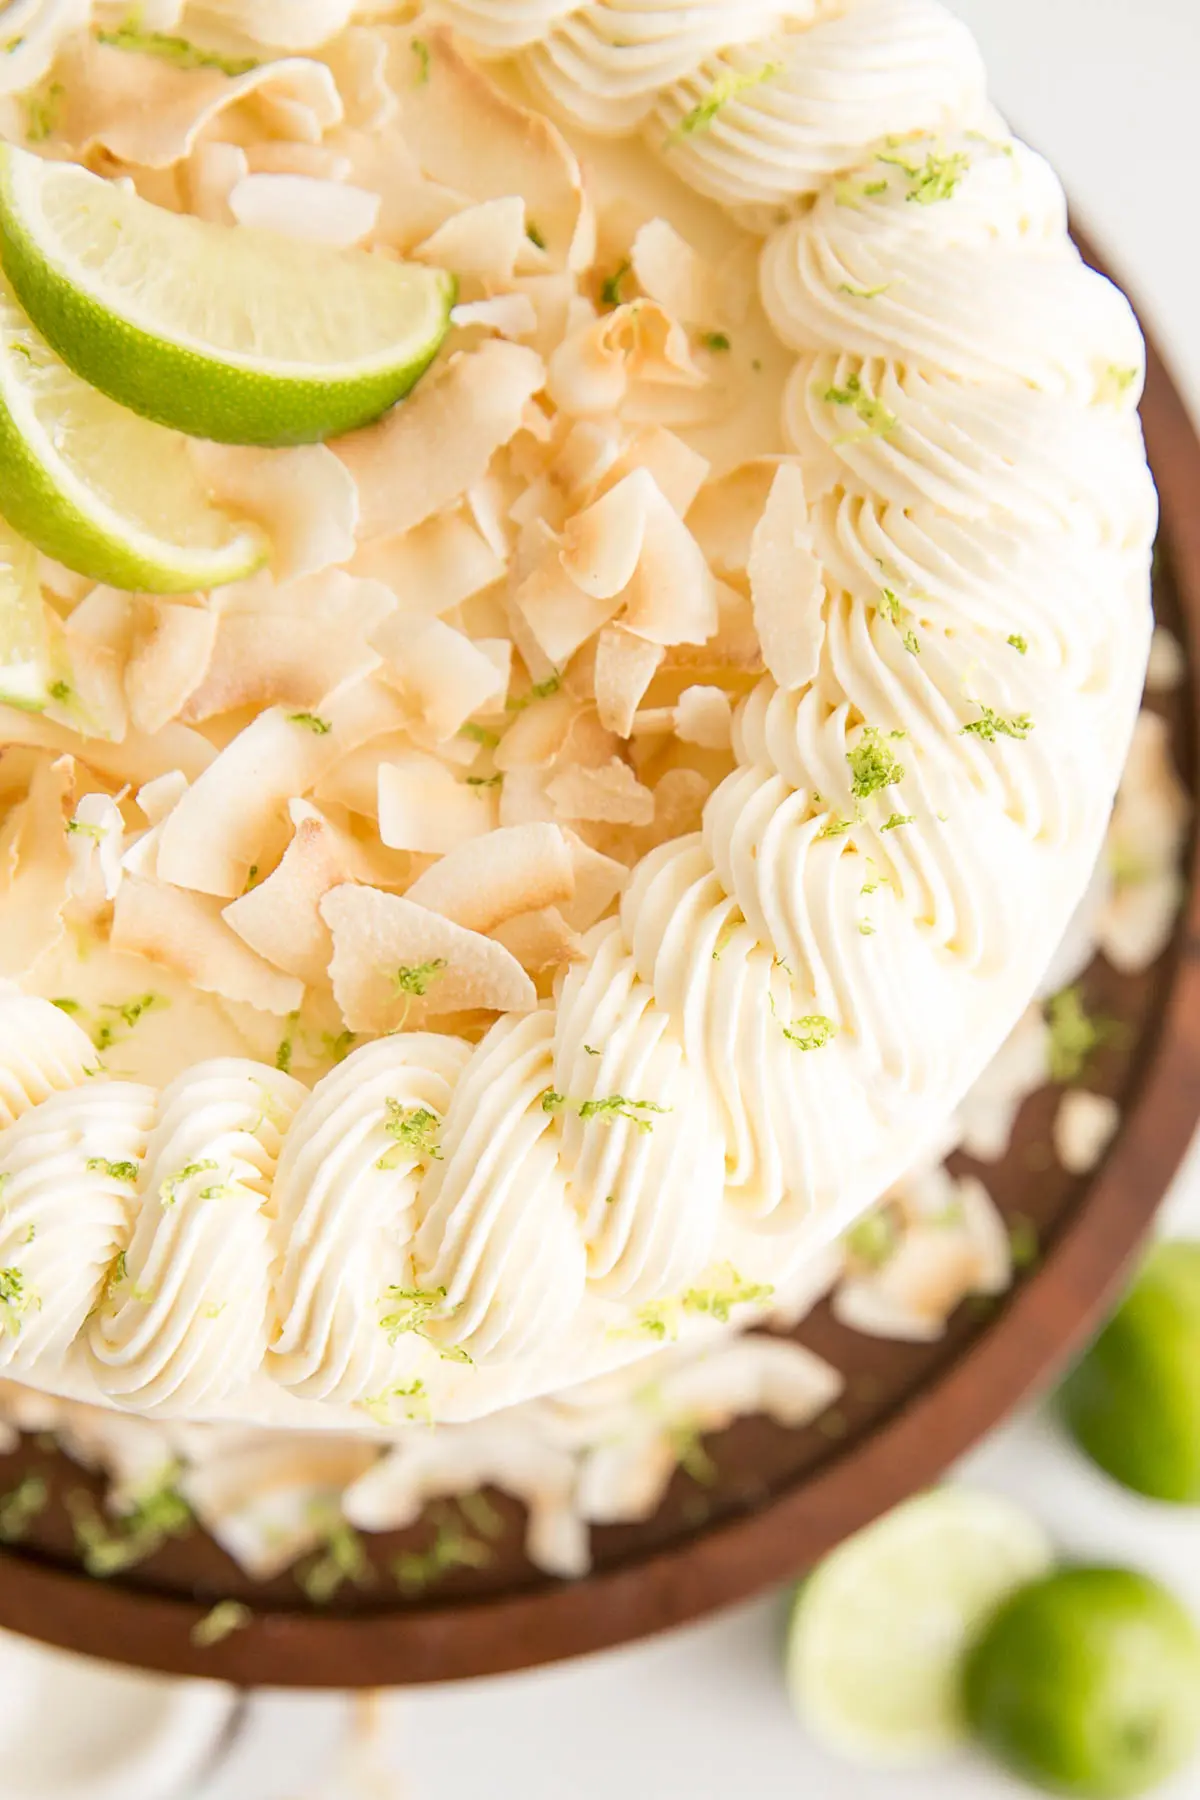 Buttercream rope border decorates the top of this coconut lime cake.